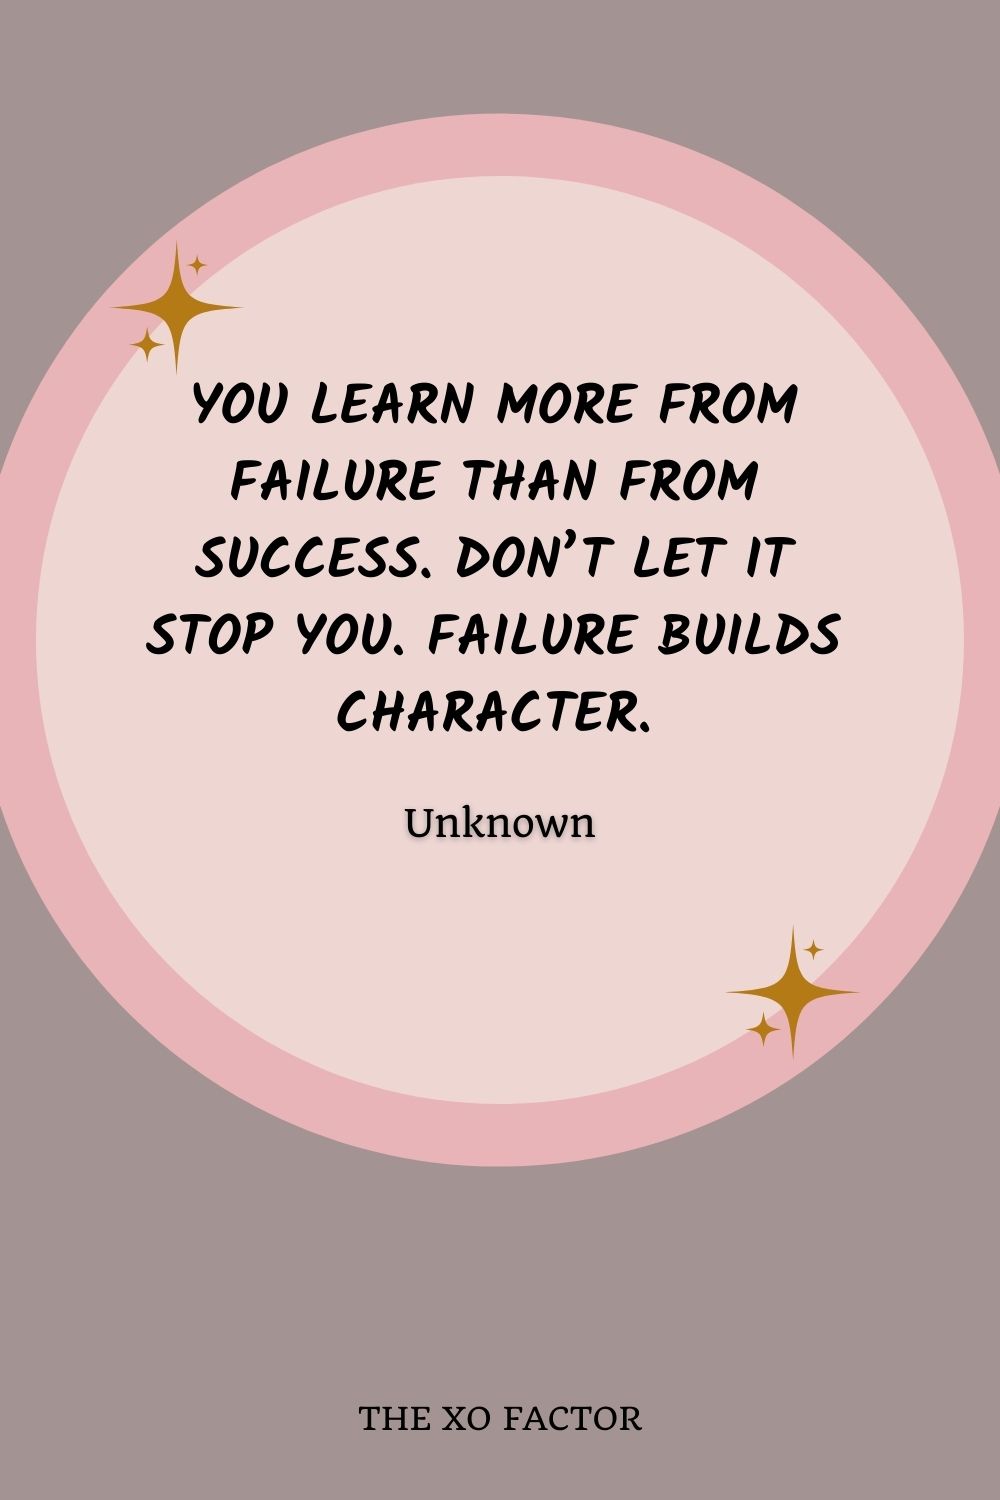 You learn more from failure than from success. Don’t let it stop you. Failure builds character.” – Unknown